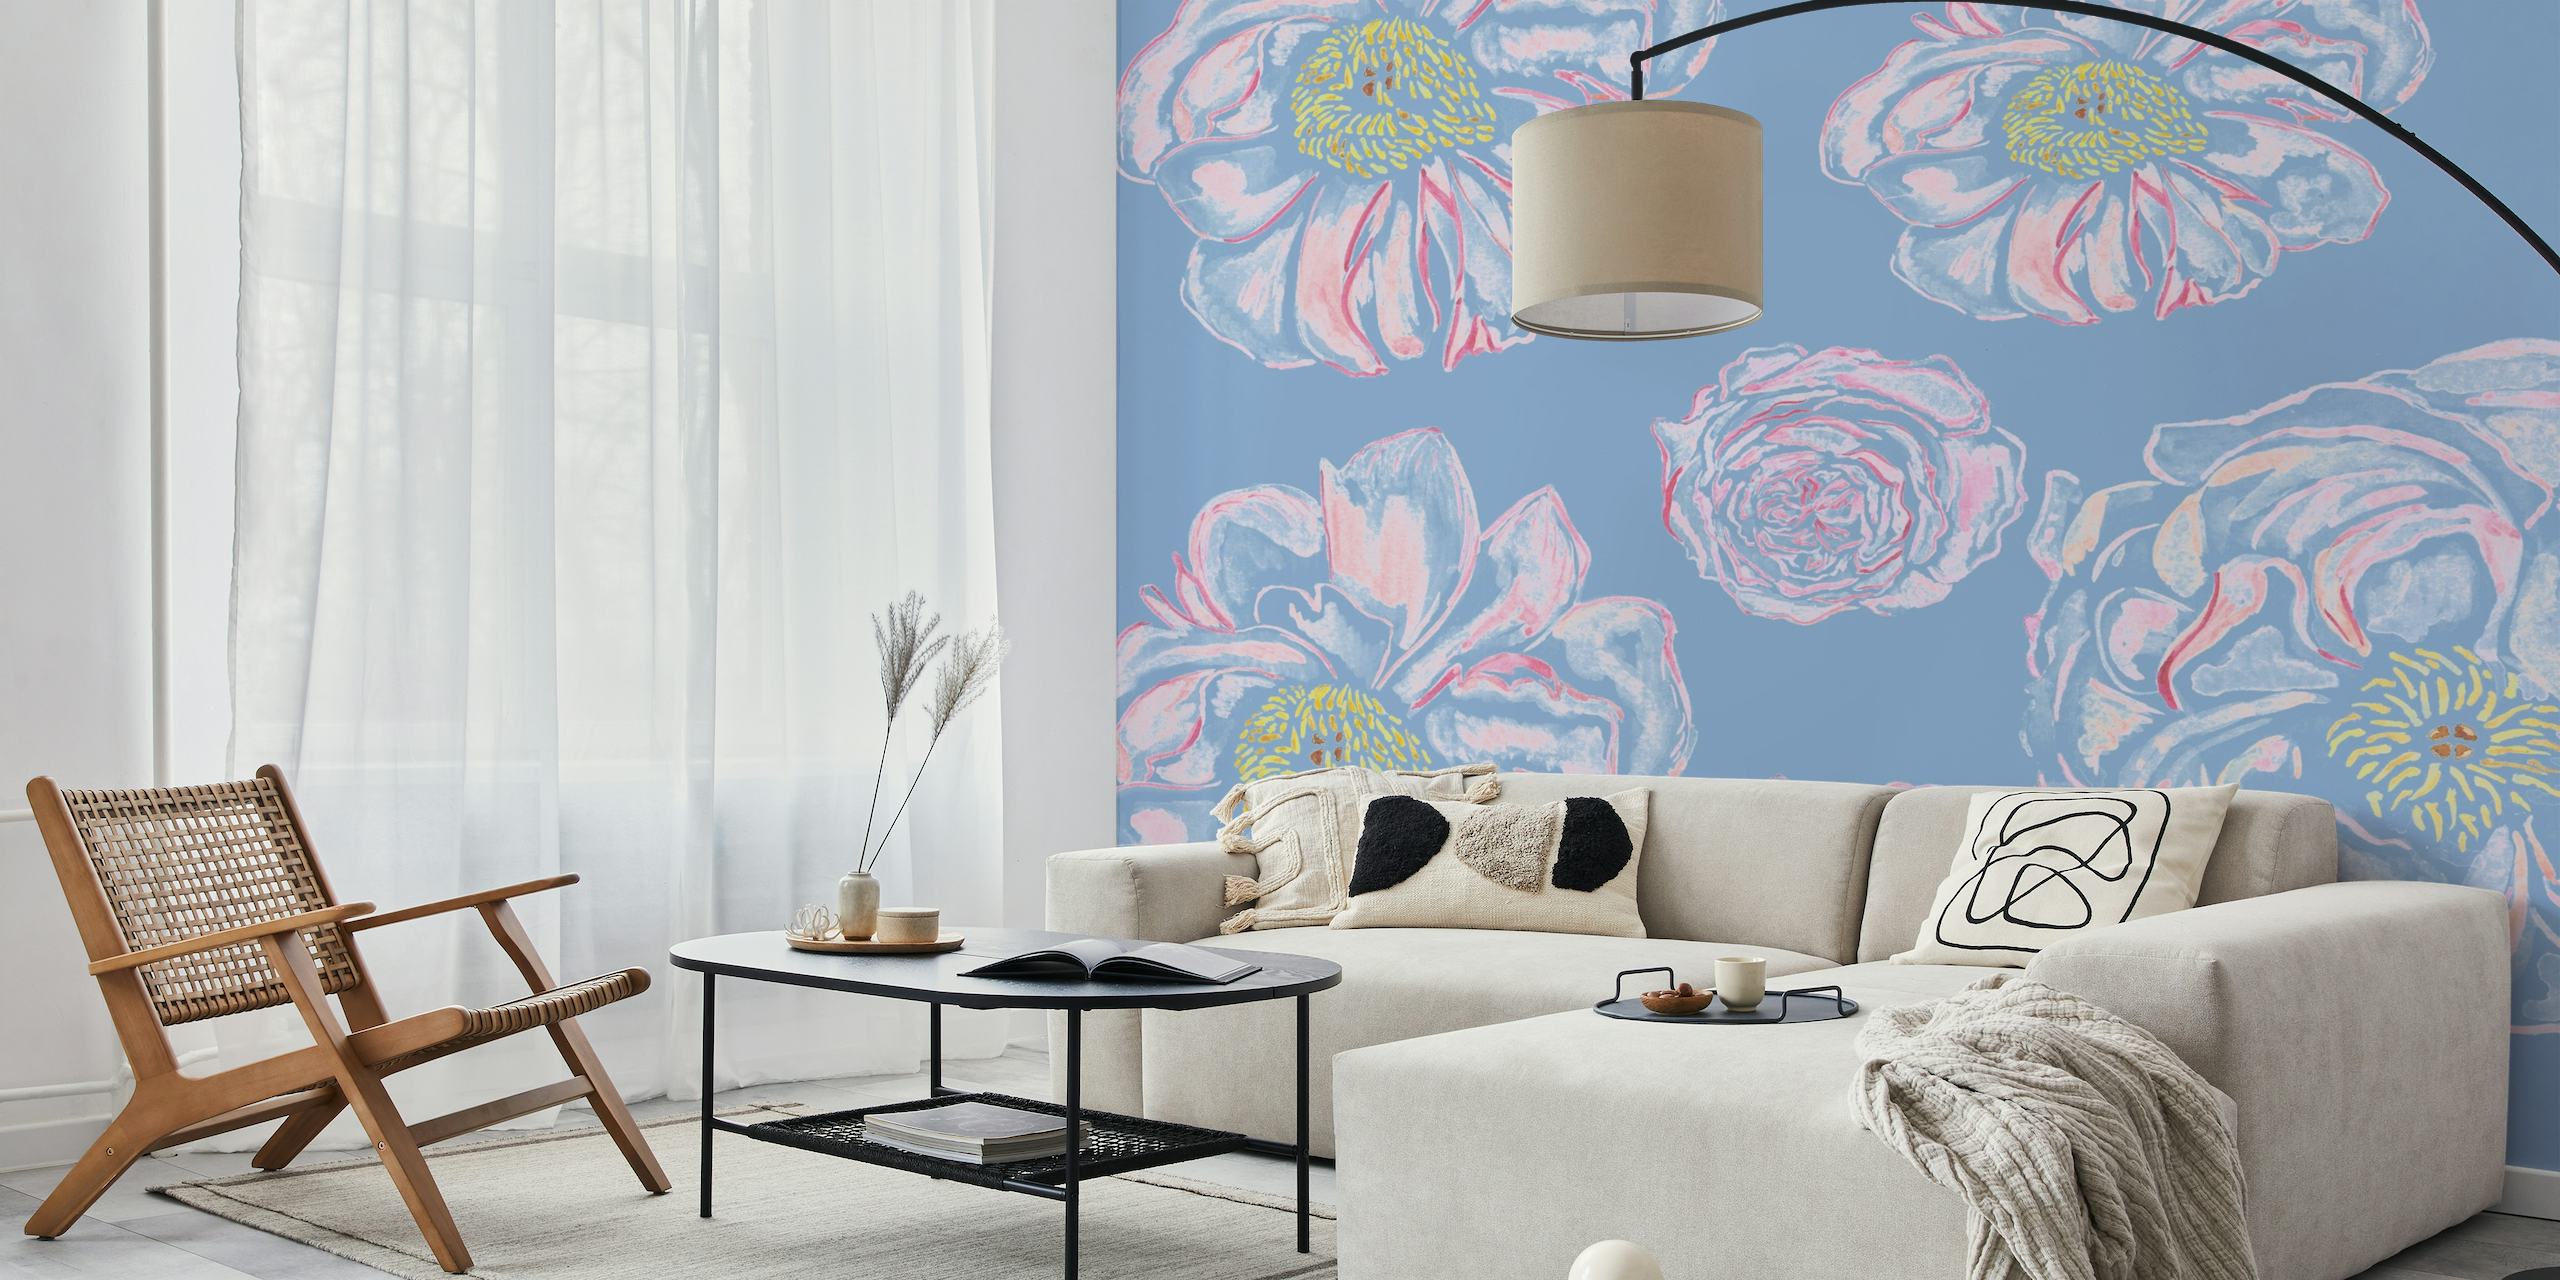 Stylized abstract flowers in shades of blue, pink, and lilac with yellow accents on wall mural